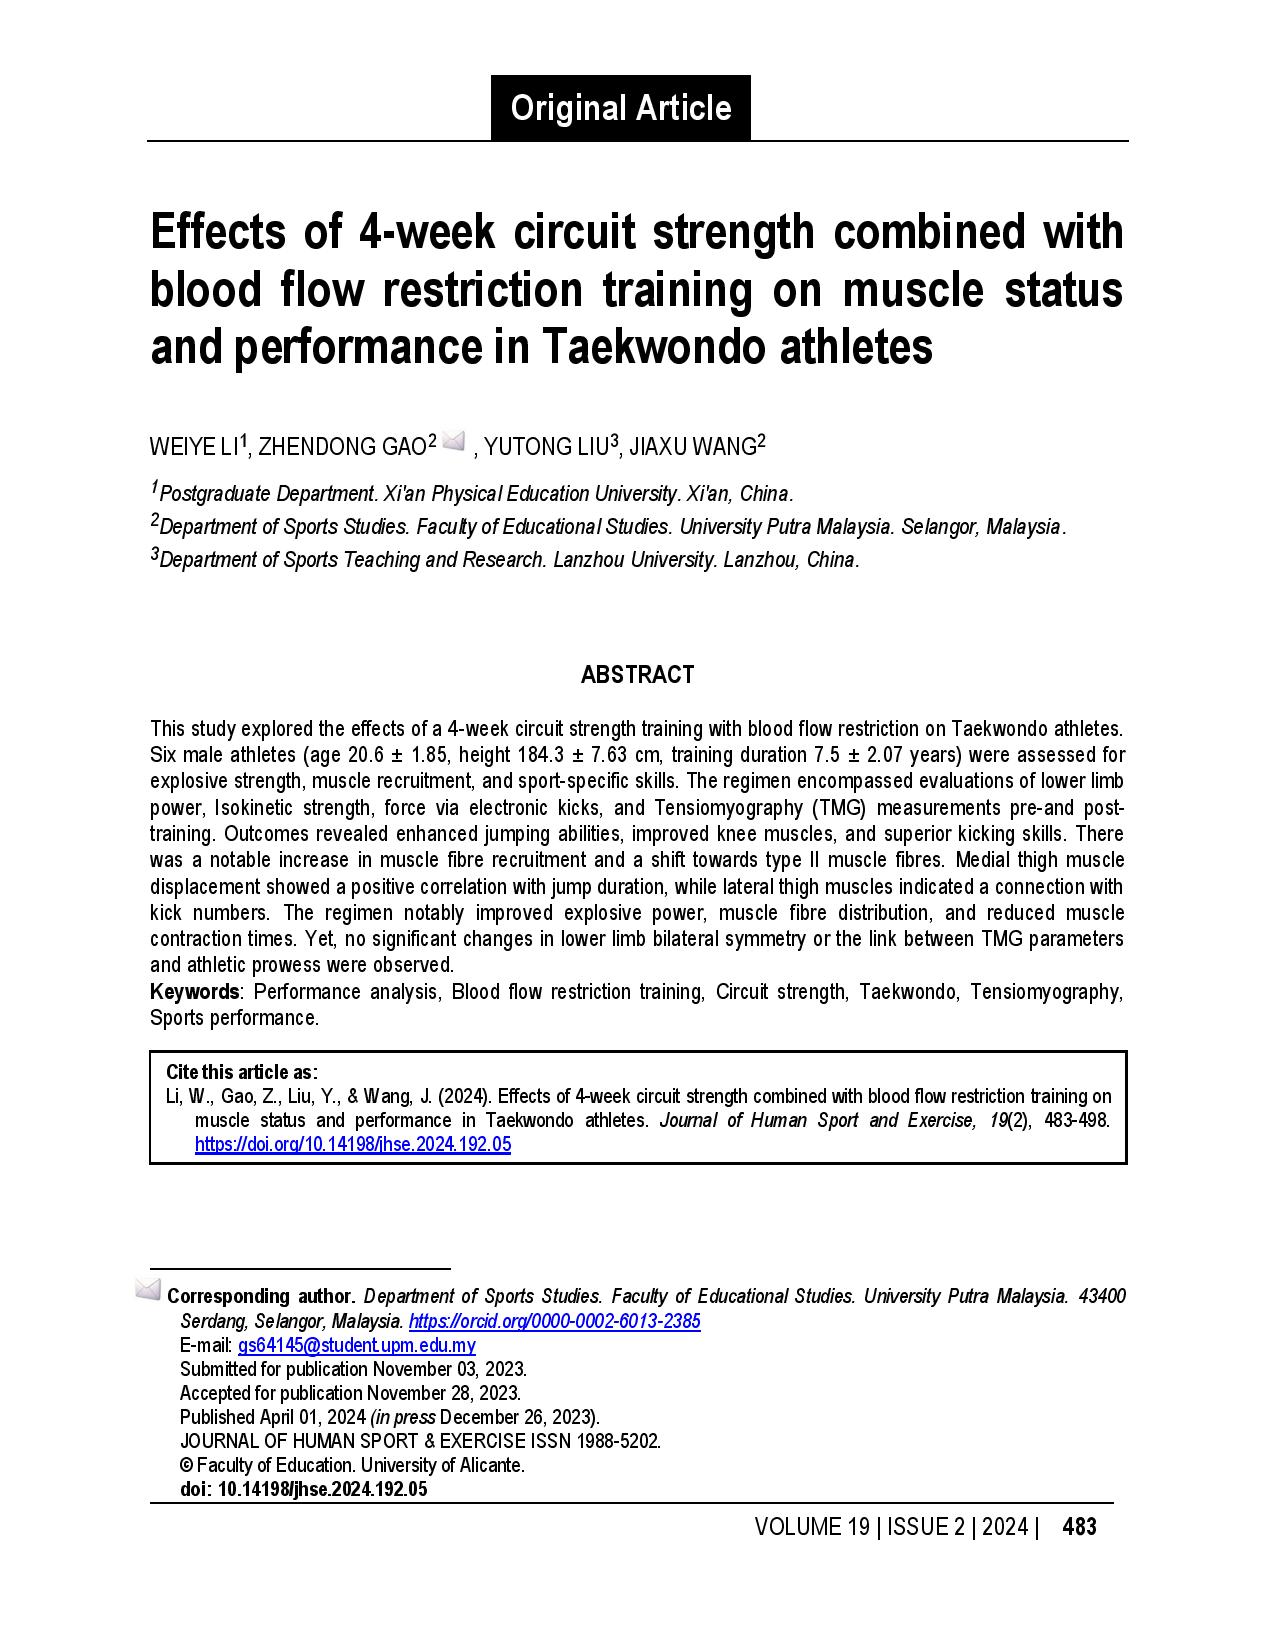 Effects of 4-week circuit strength combined with blood flow restriction training on muscle status and performance in Taekwondo athletes